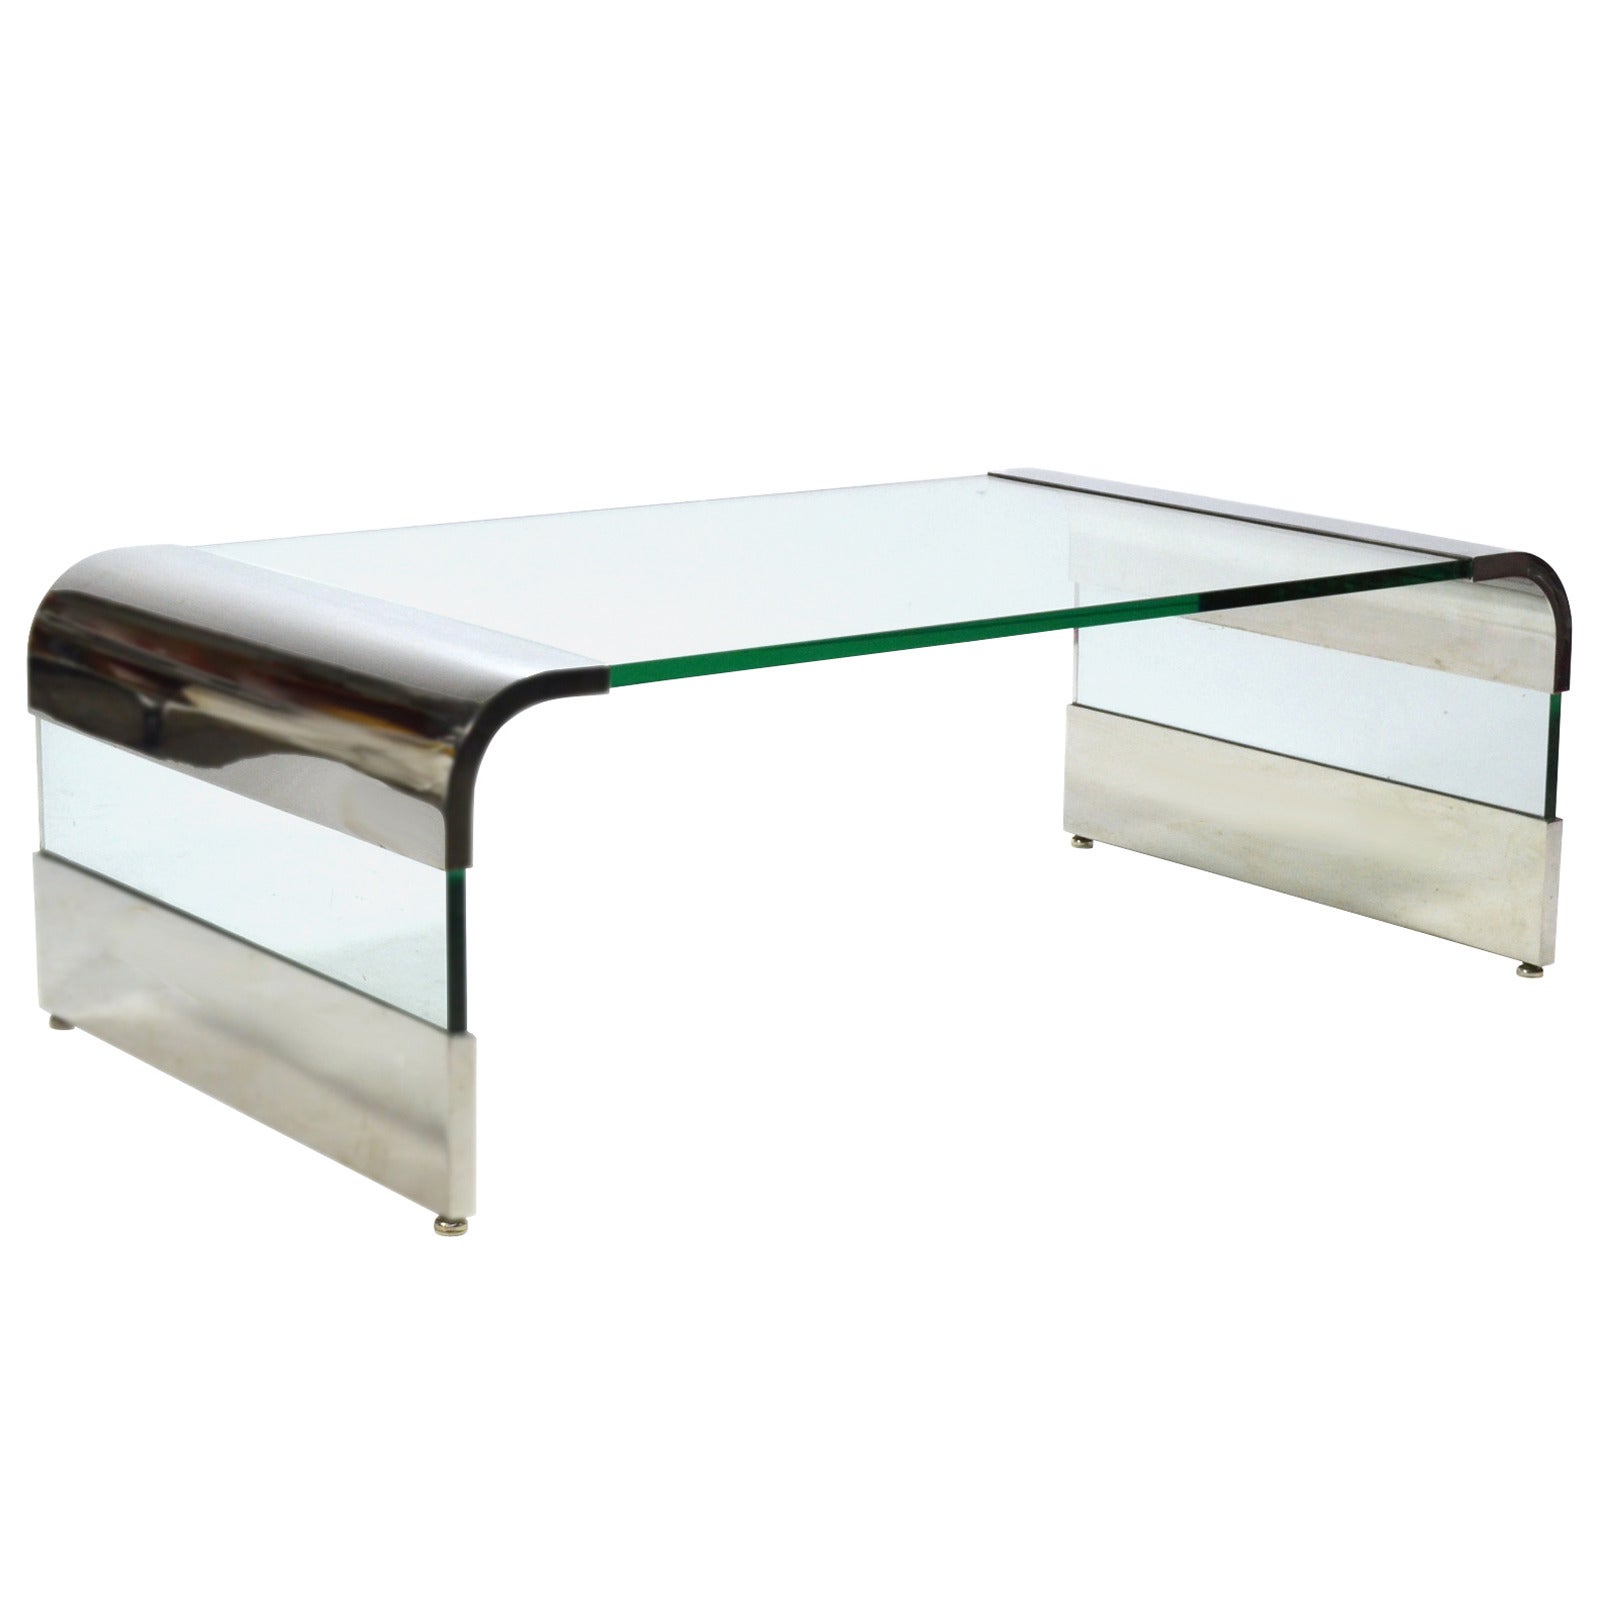 Leon Rosen Chrome and Glass Waterfall Coffee Table by Pace